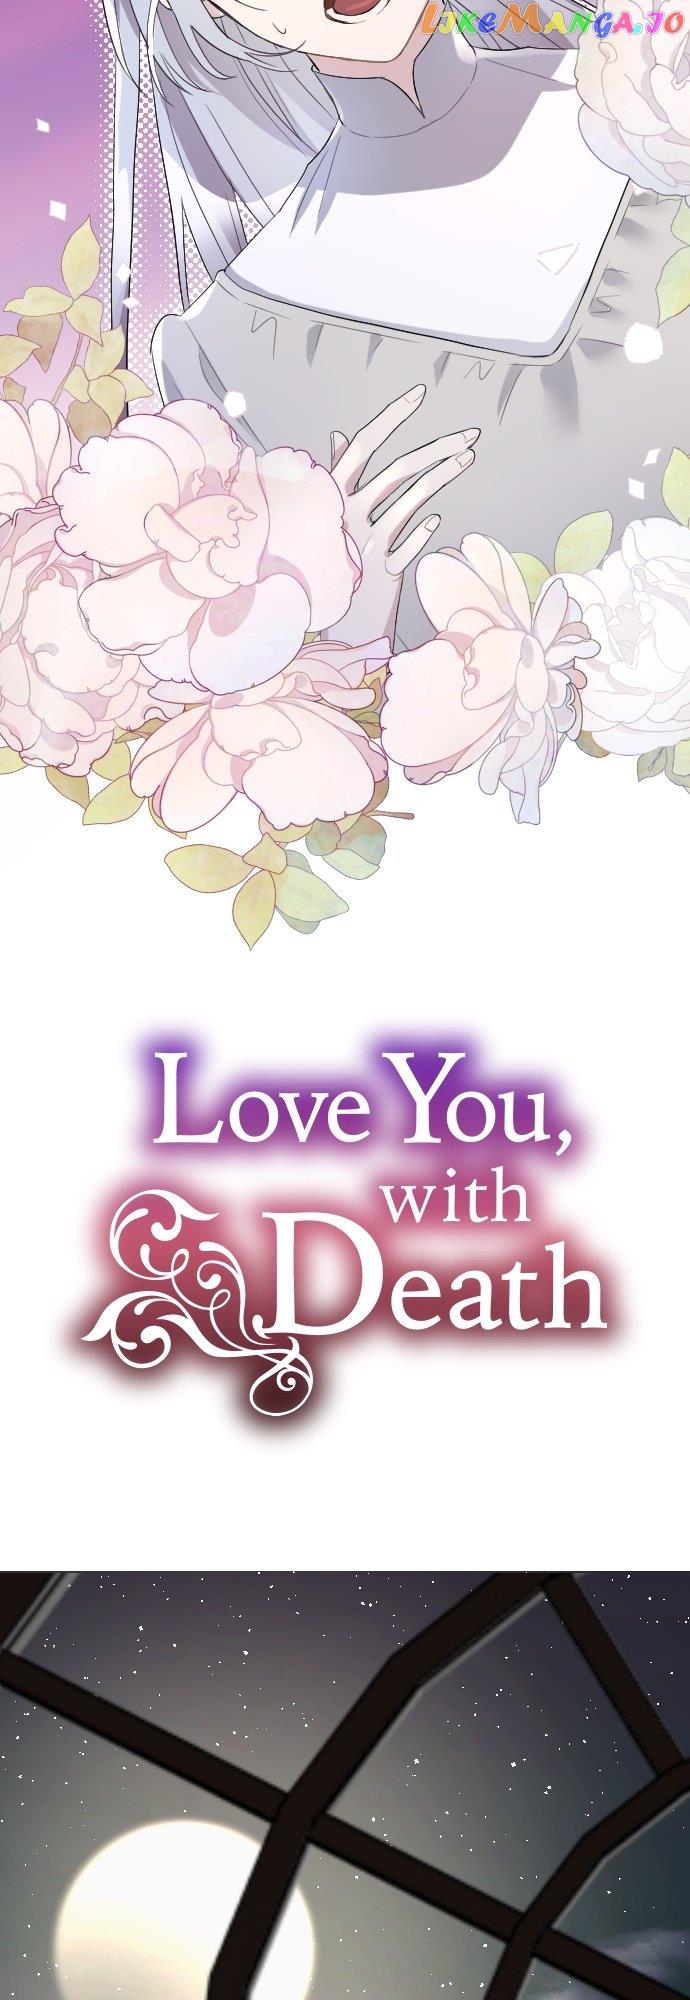 Love You, with Death chapter 5